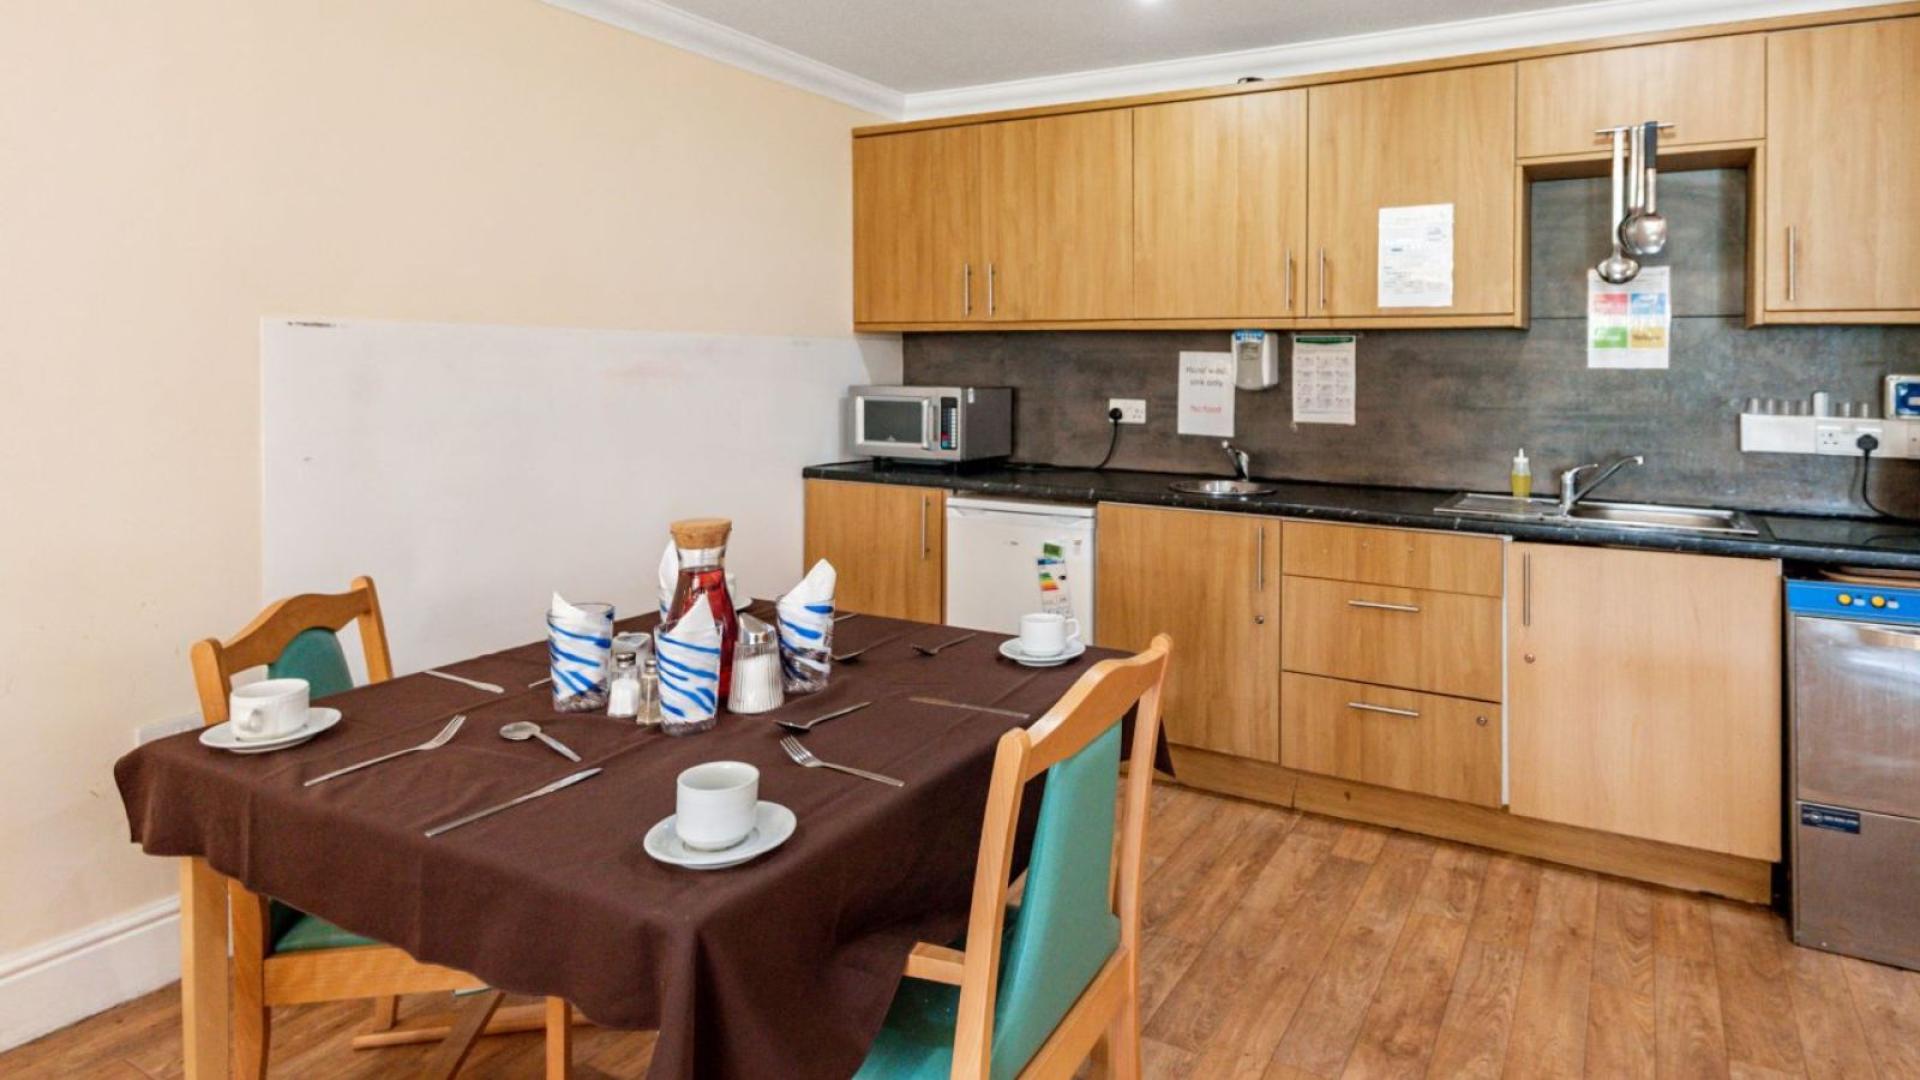 Kitchen at Thornton Hall and Lodge Care Home in Liverpool